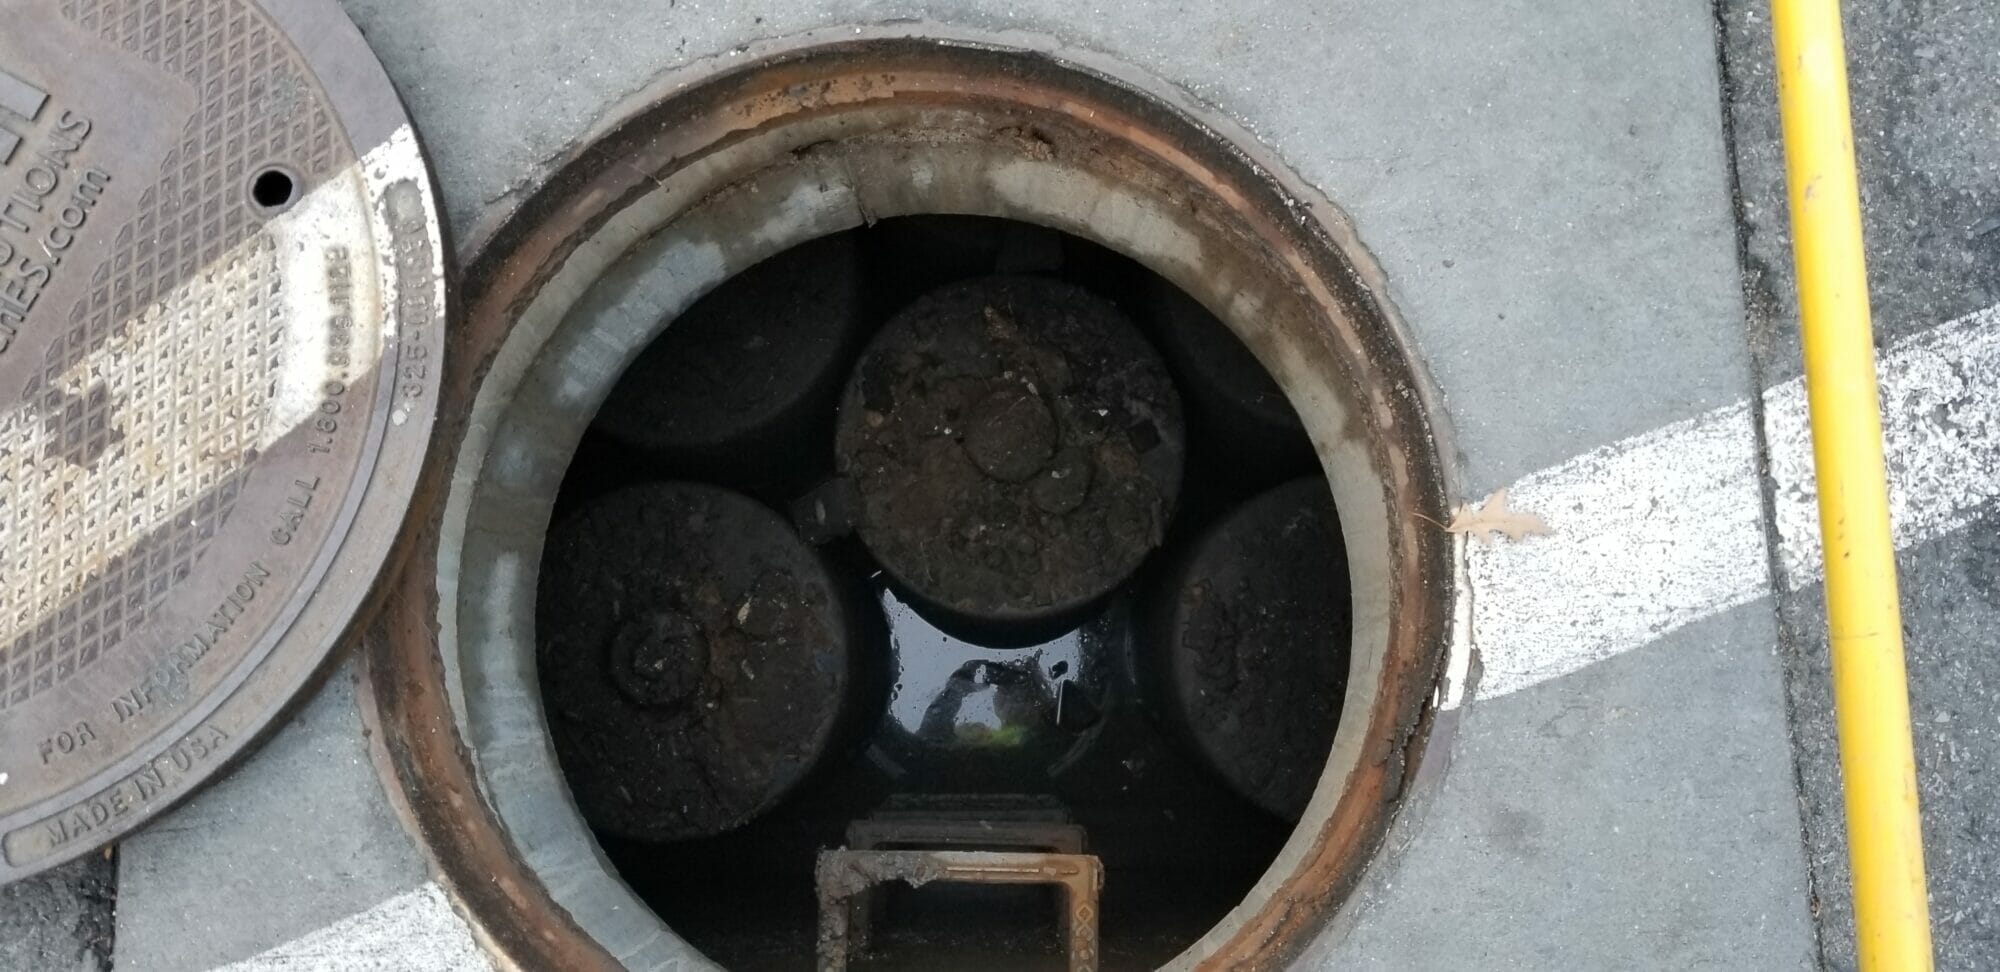 Stormwater manhole with stormwater filters